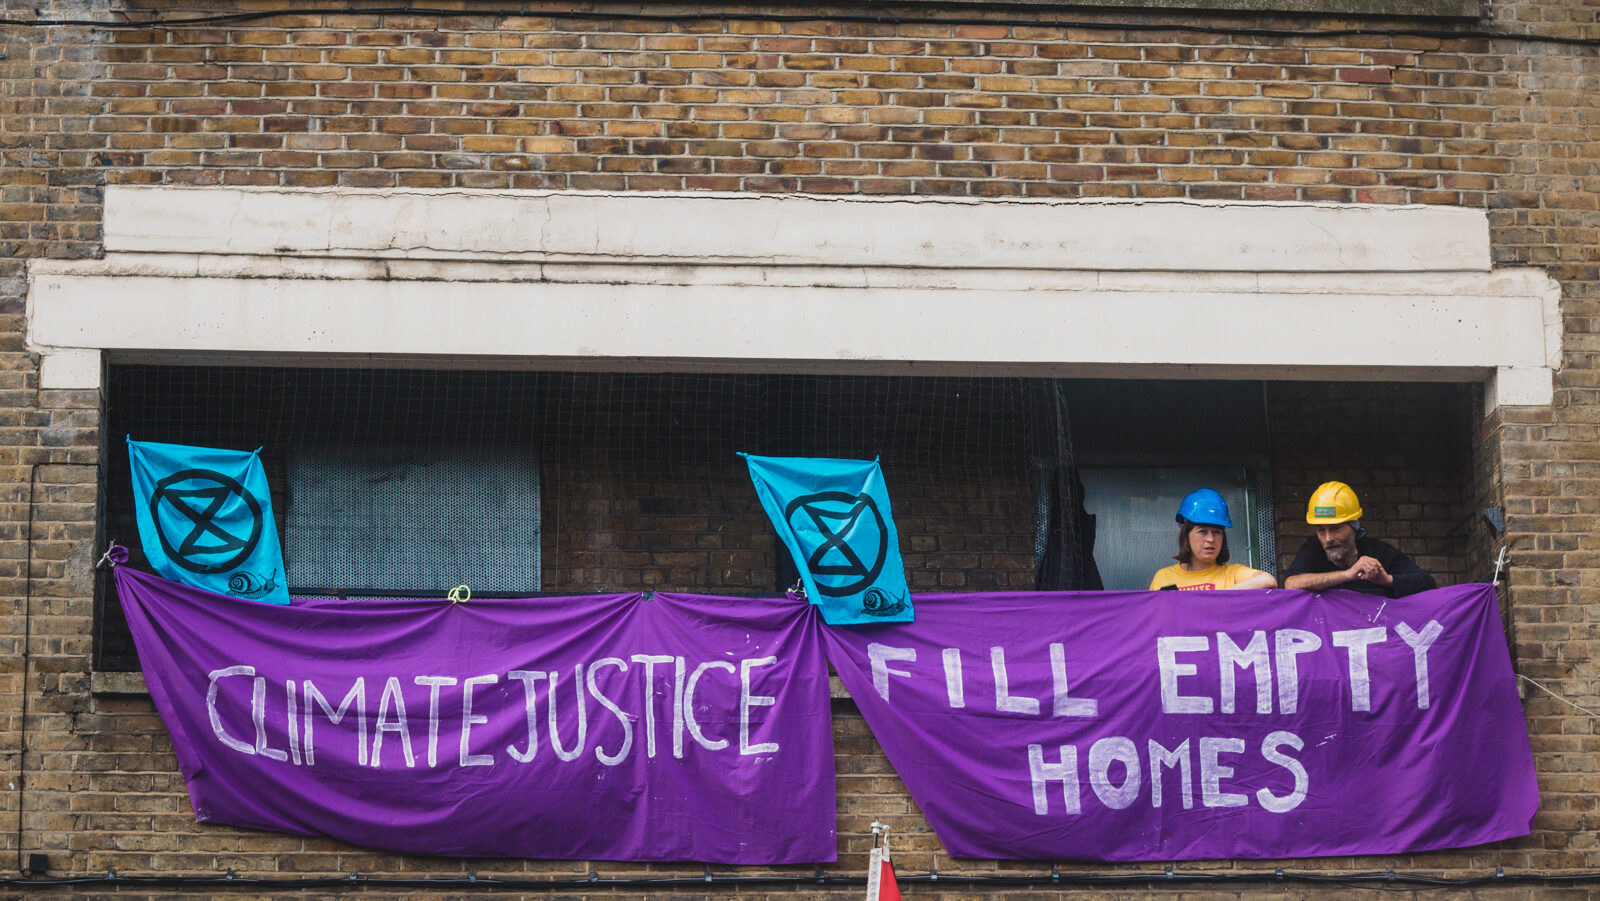 Housing Rebellion want to tackle the housing crisis and climate crisis